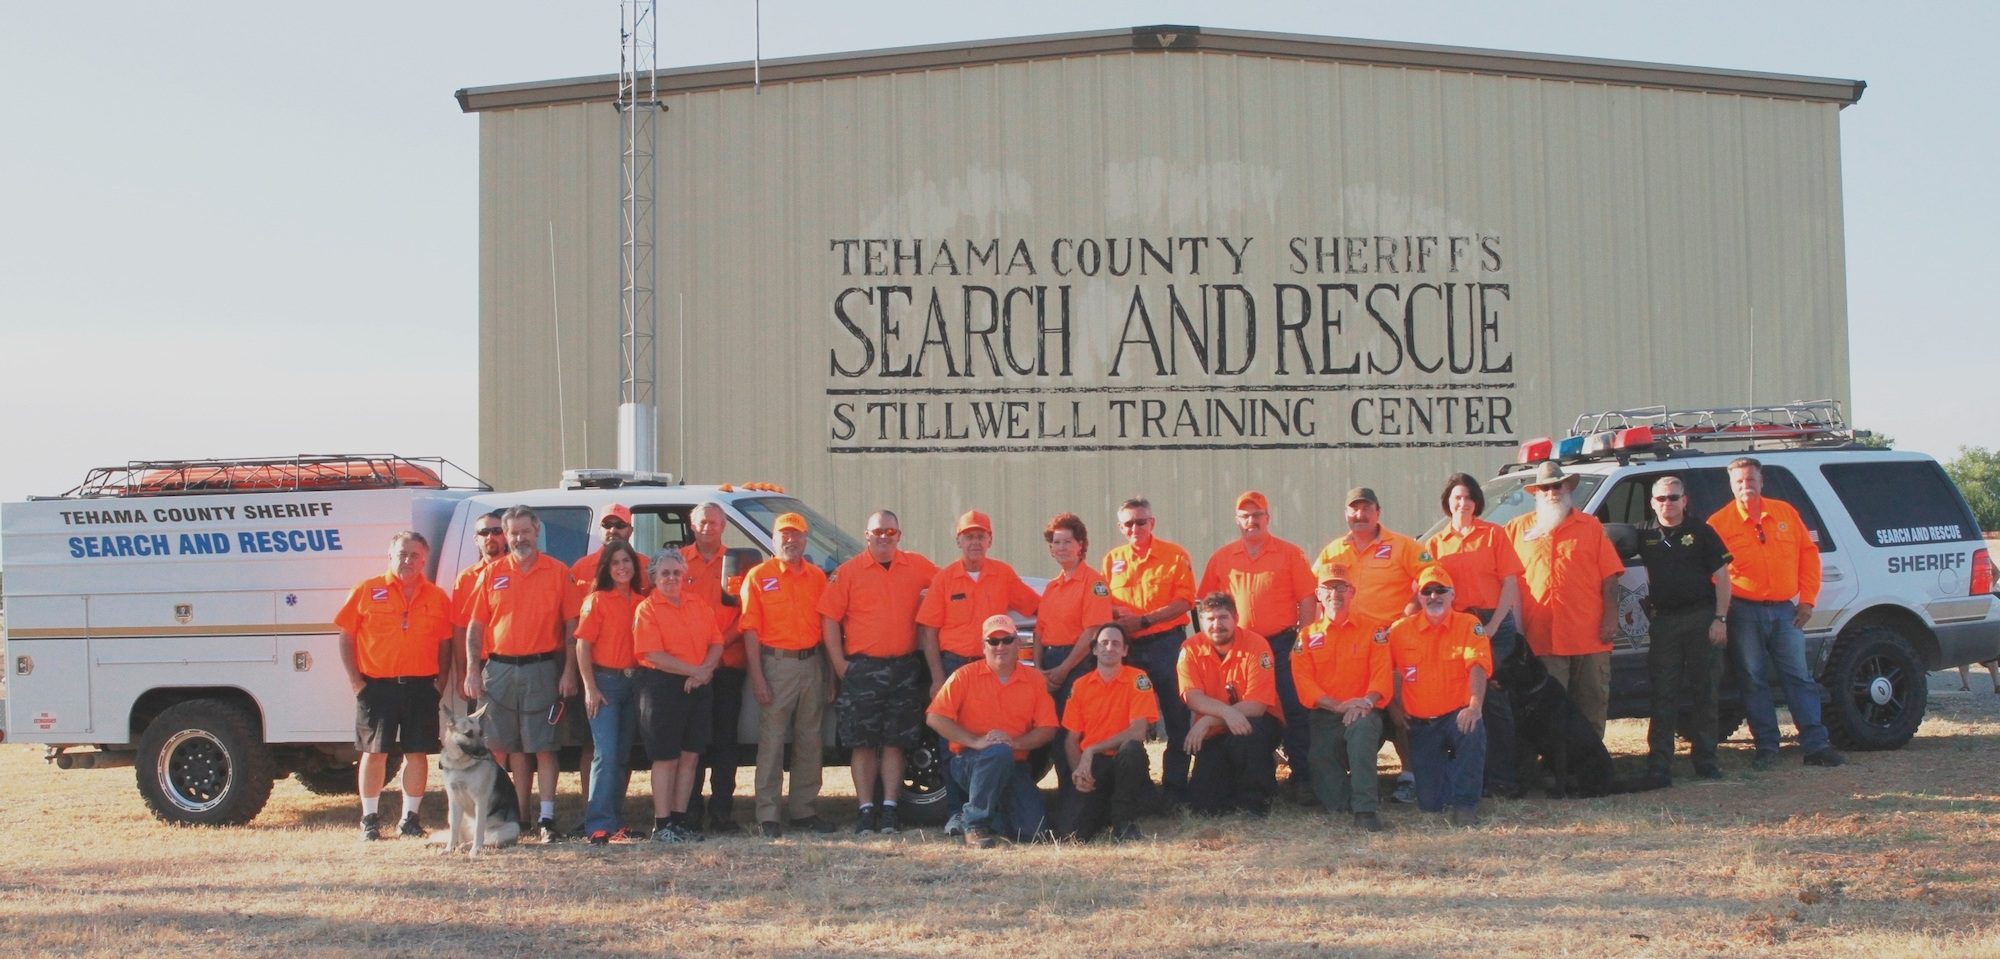 Search And Rescue Operations Division Tehama County Sheriff S Office